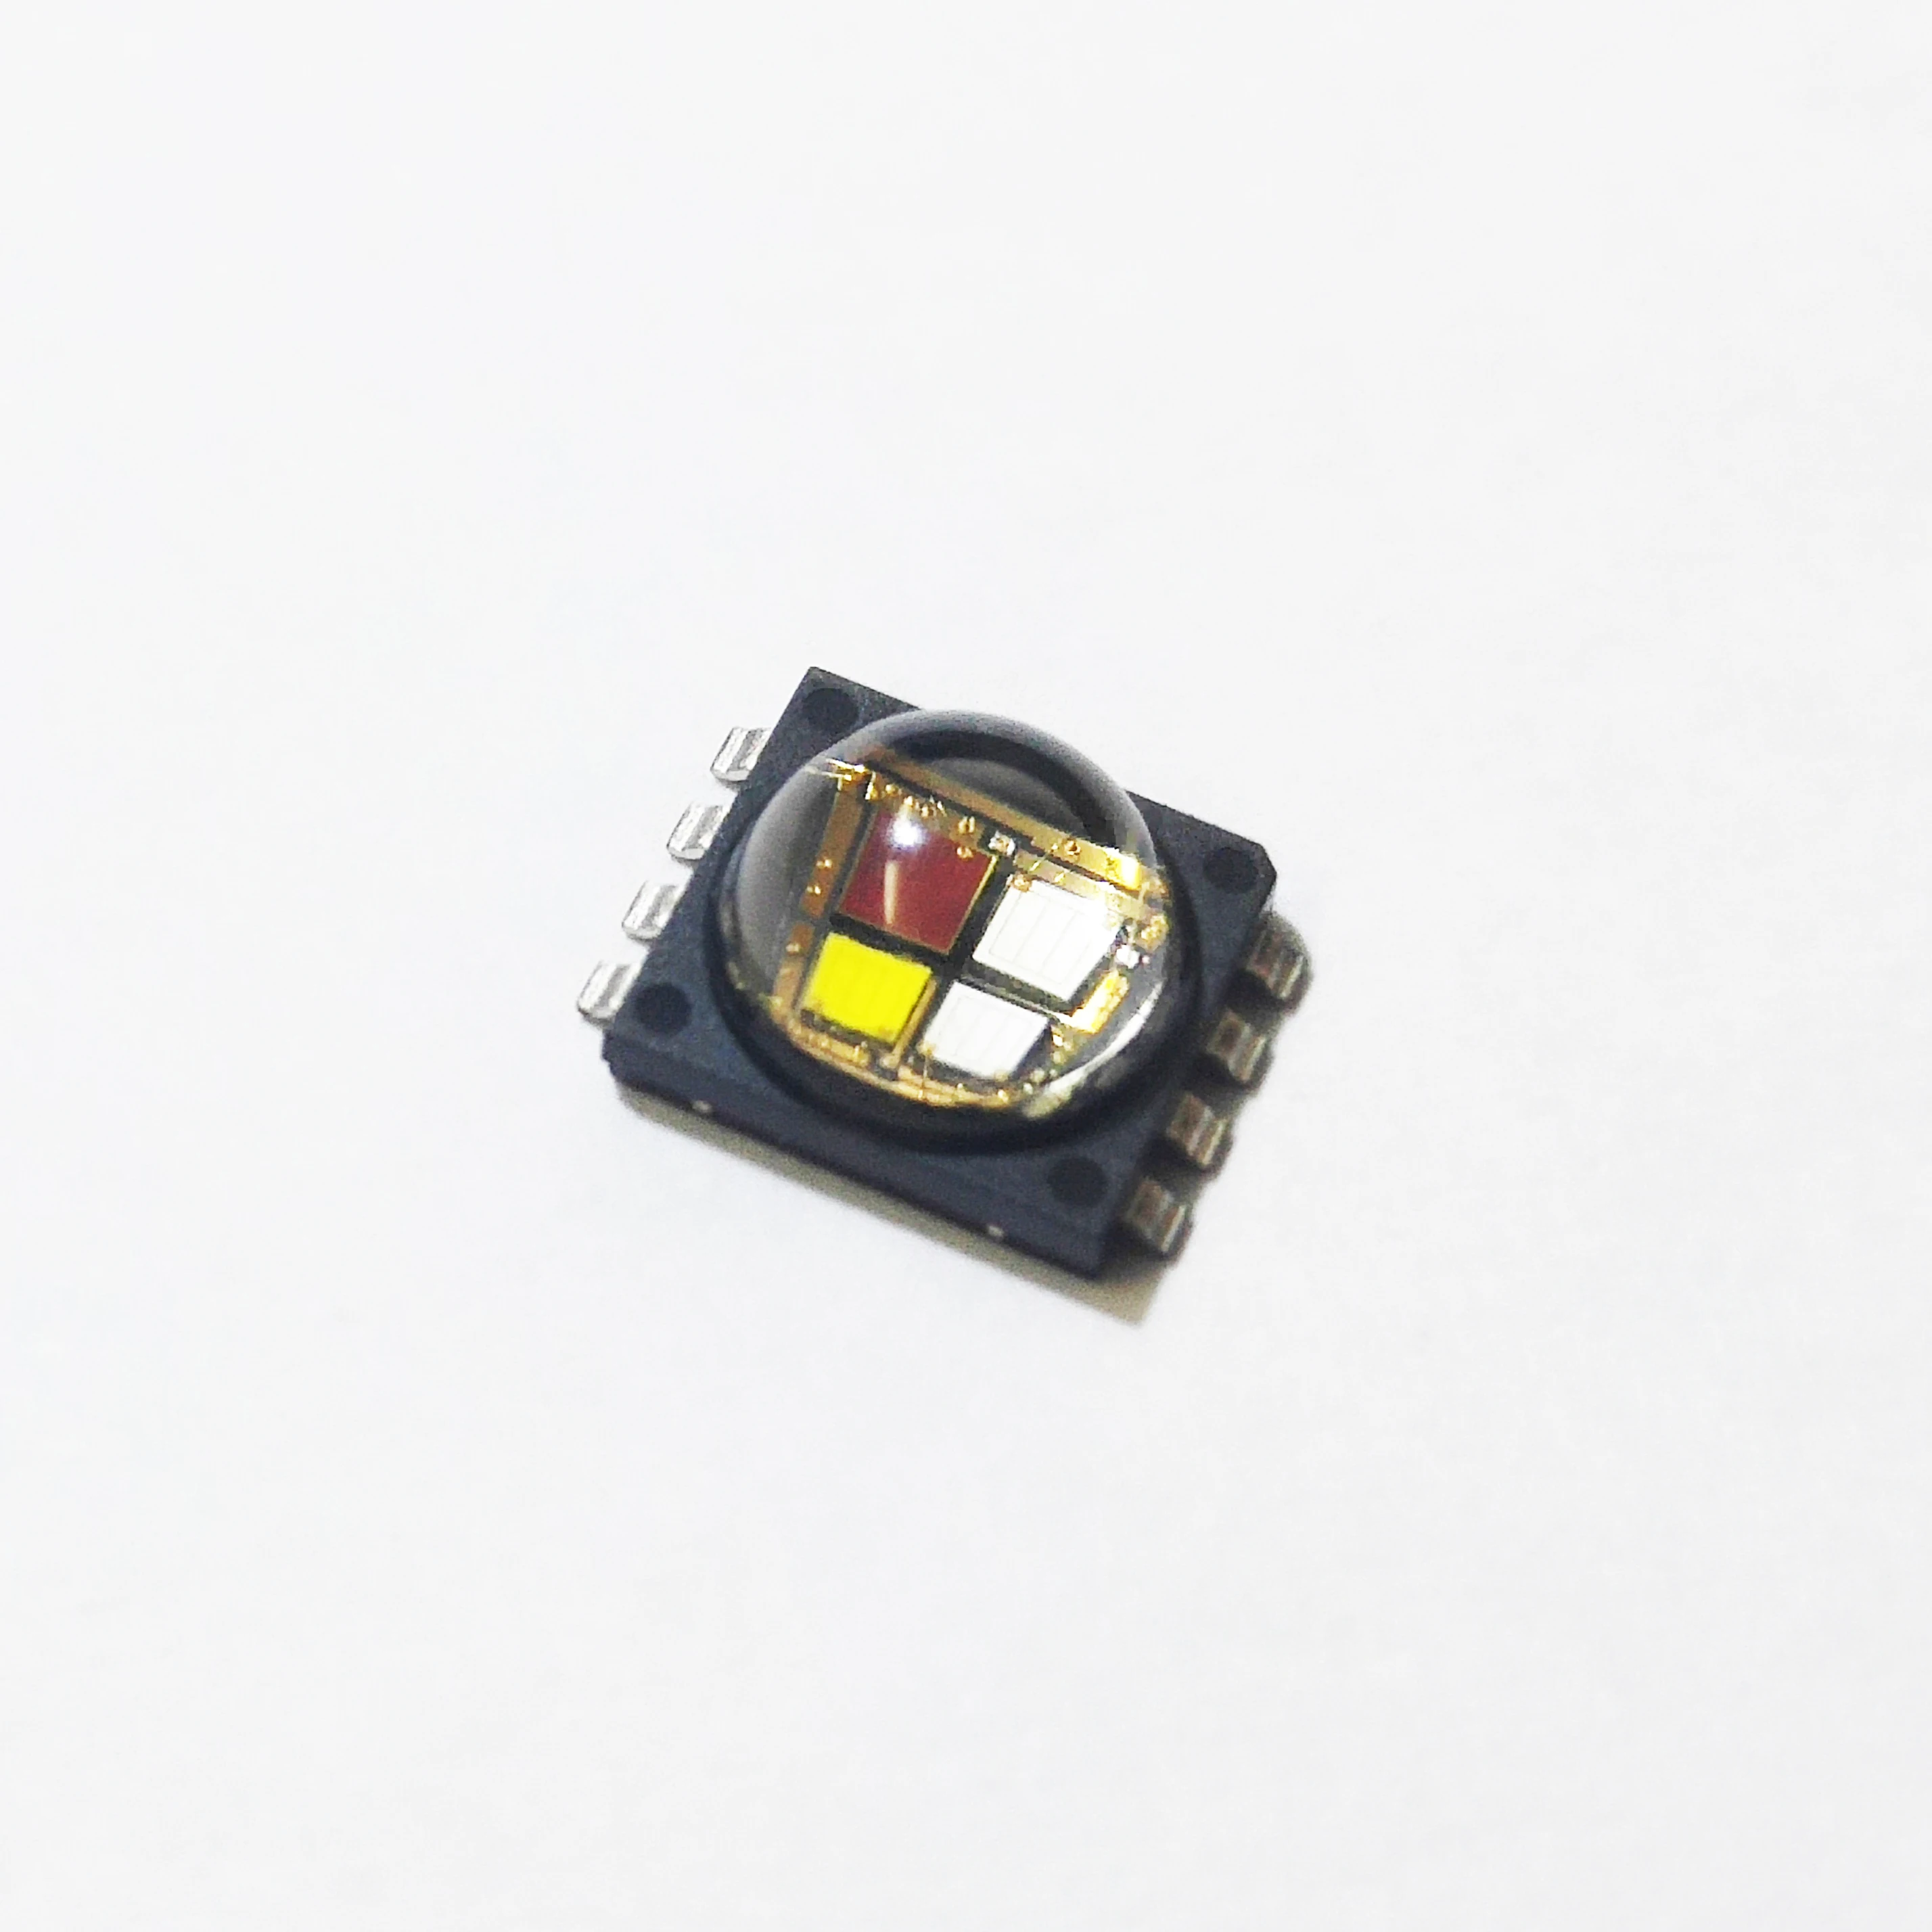 
New and Original MCE RGBW Series LED Chip RGBW LED Diode  (60250914132)